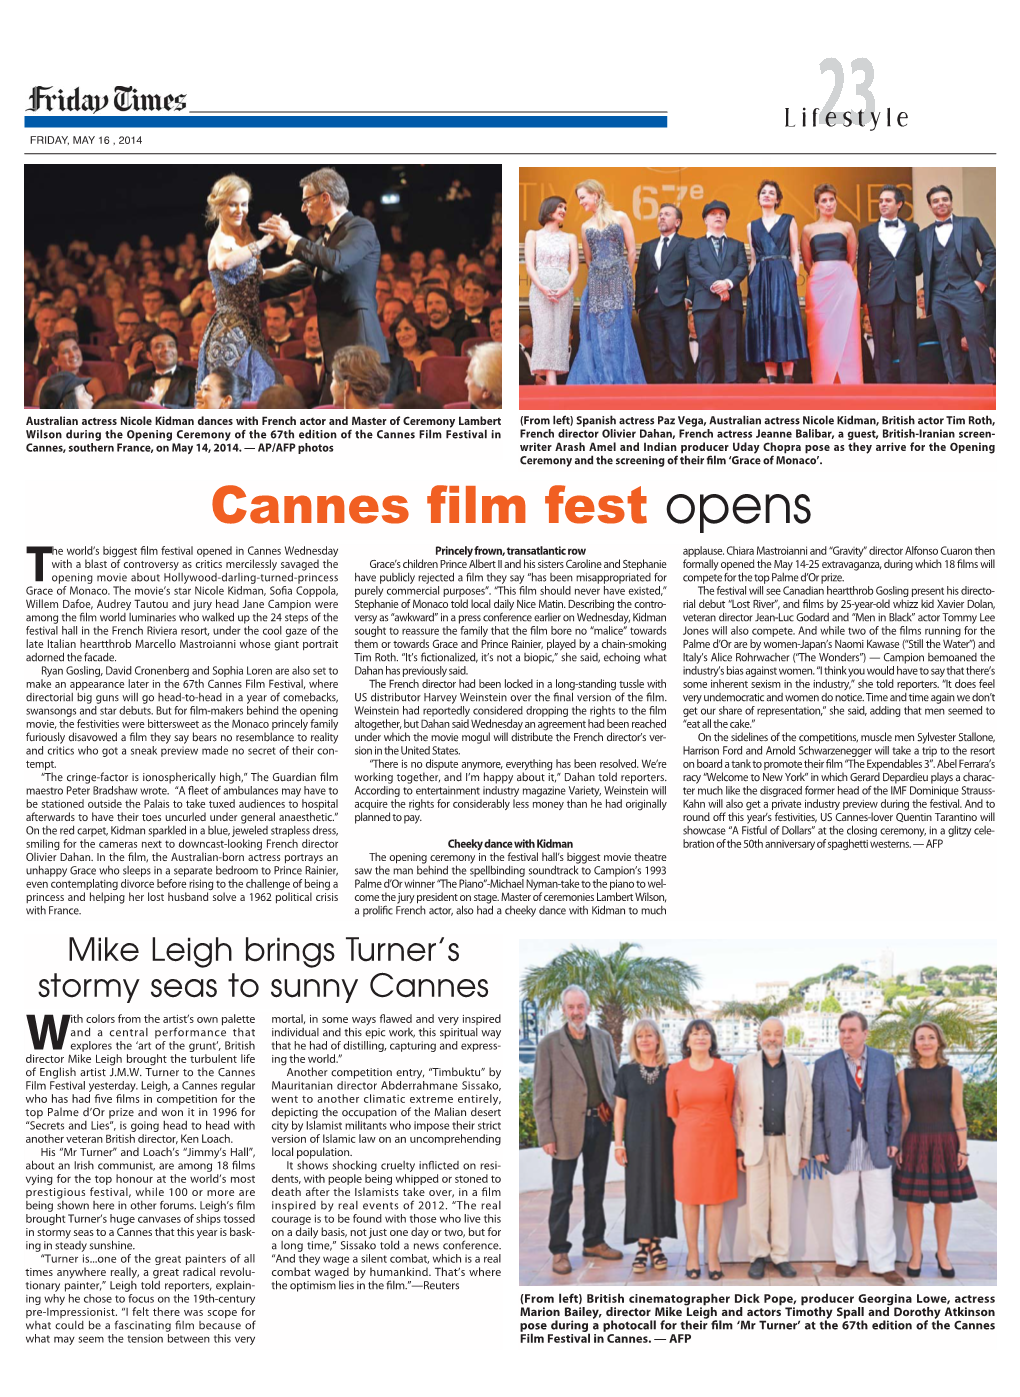 Cannes Film Fest Opens He World’S Biggest Film Festival Opened in Cannes Wednesday Princely Frown, Transatlantic Row Applause